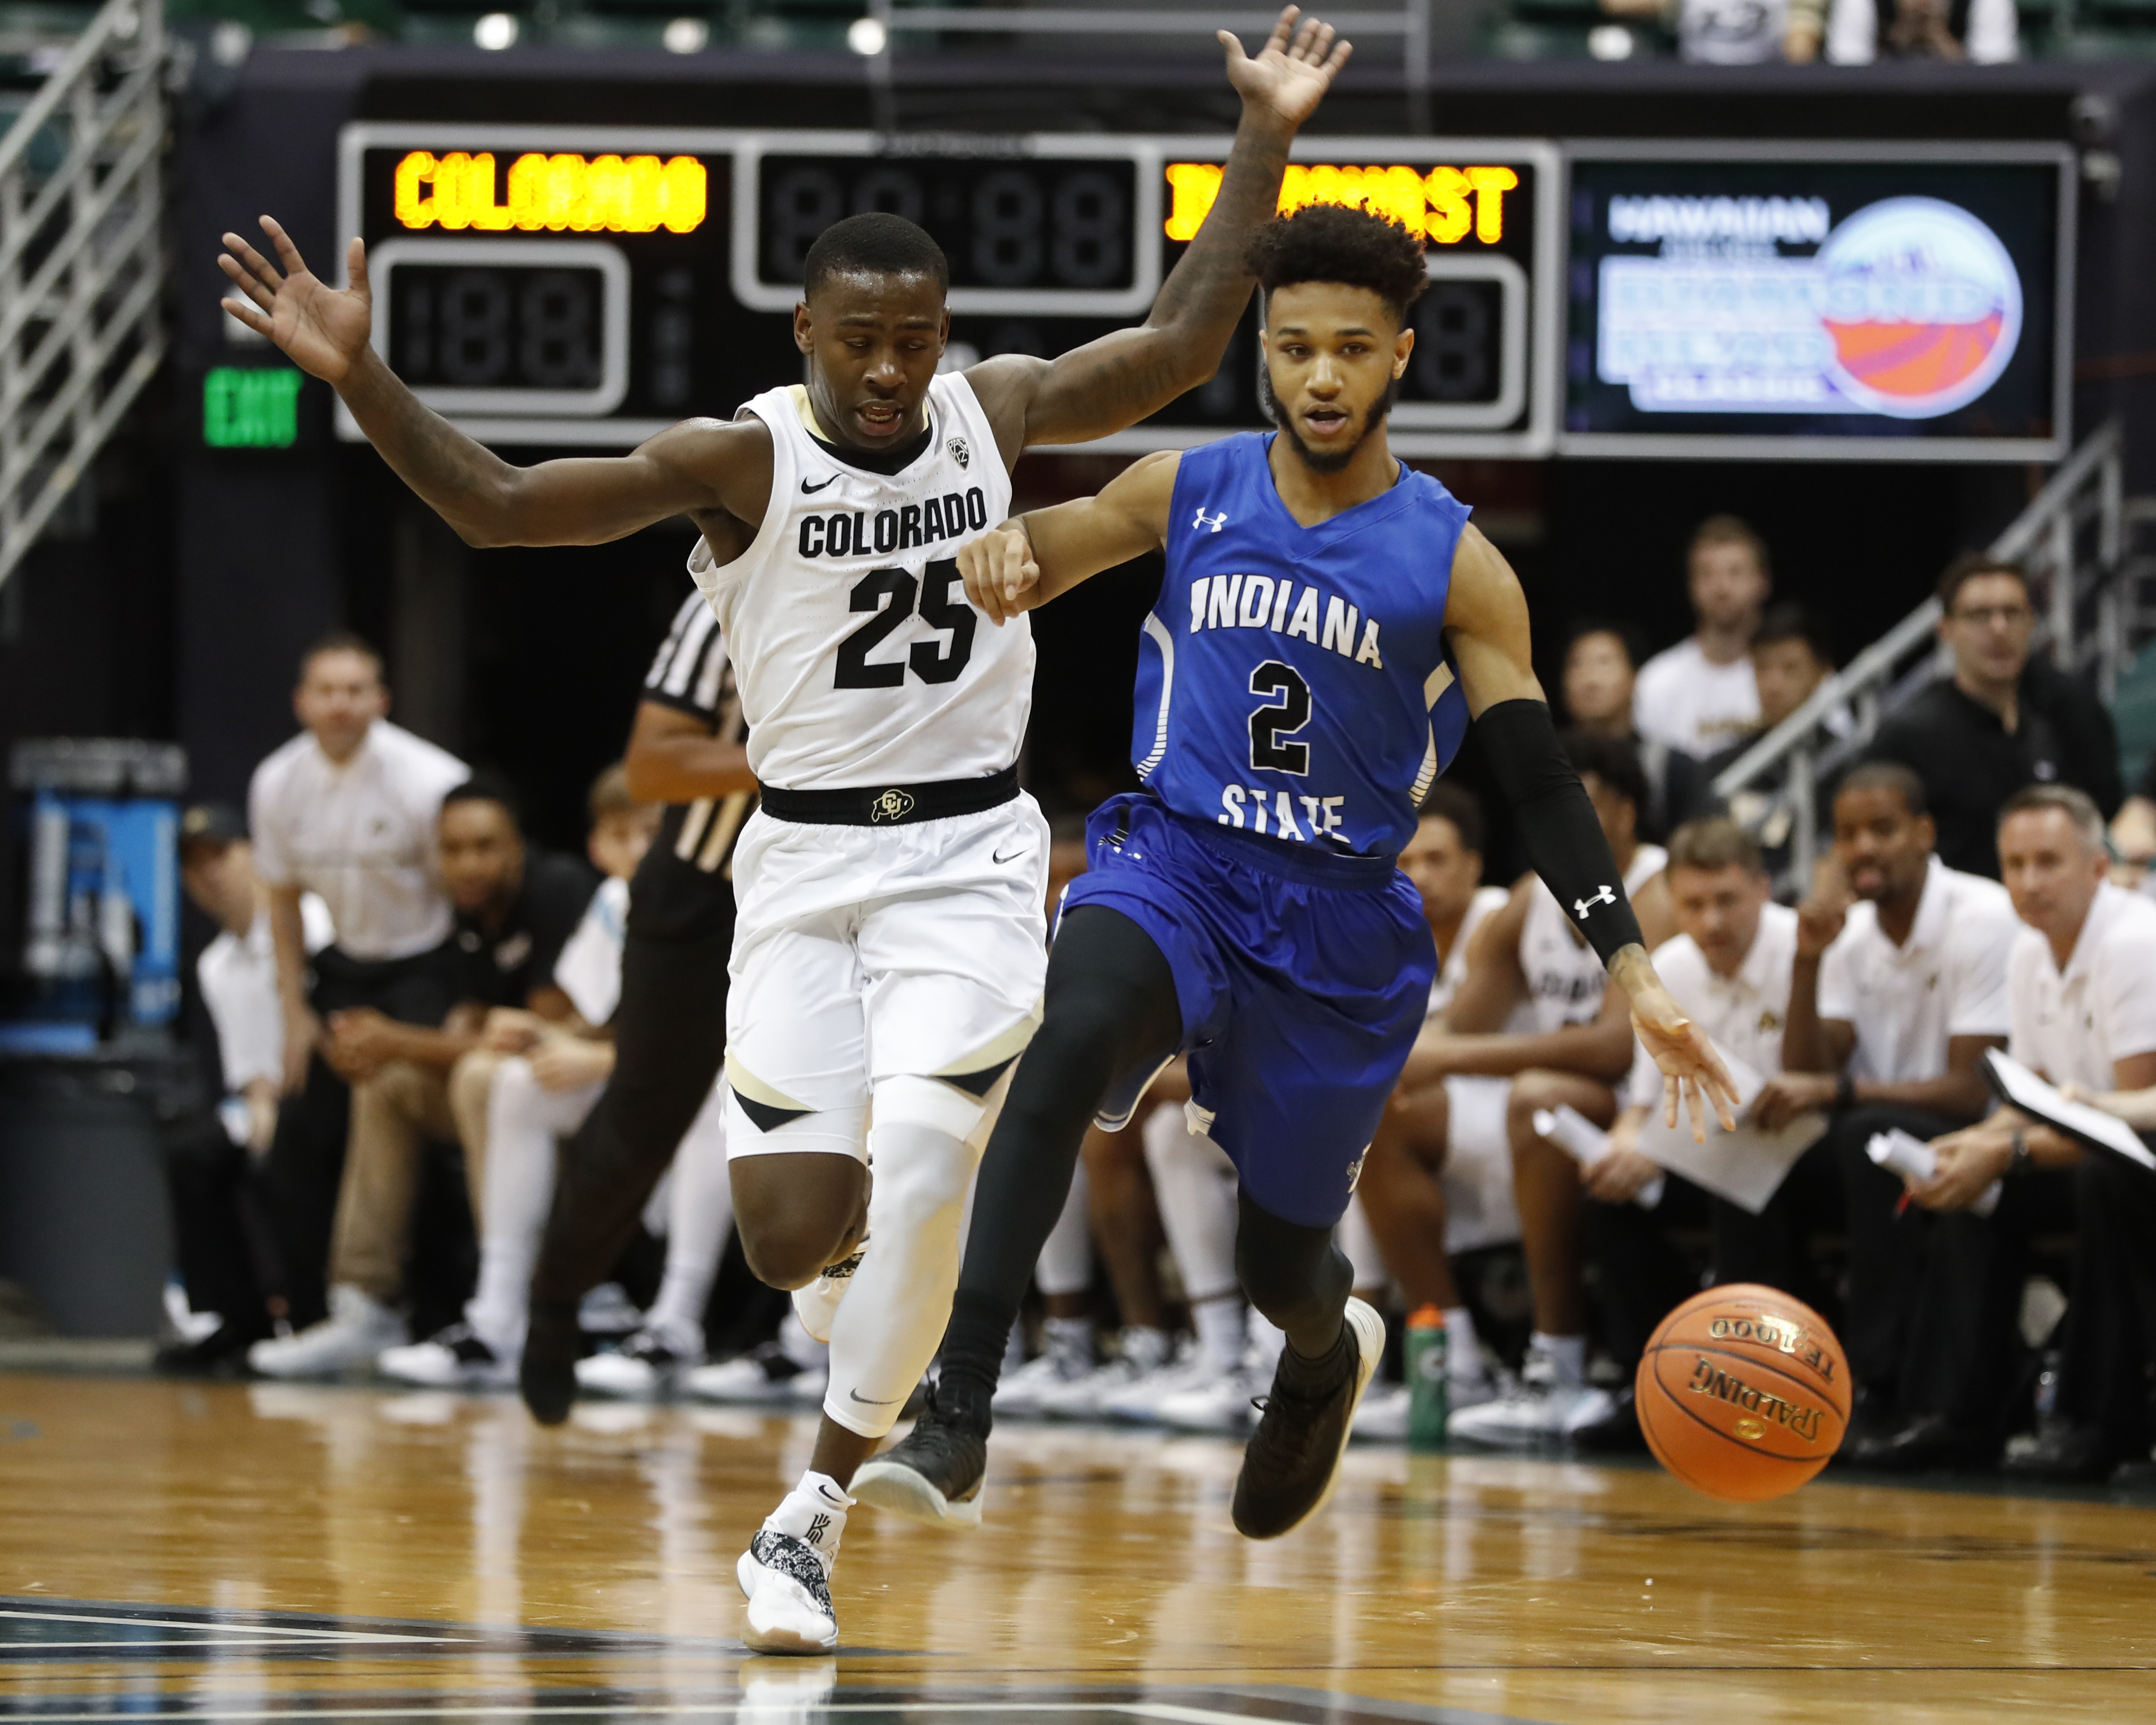 Barnes makes 5 3-pointers, Indiana State beats Colorado